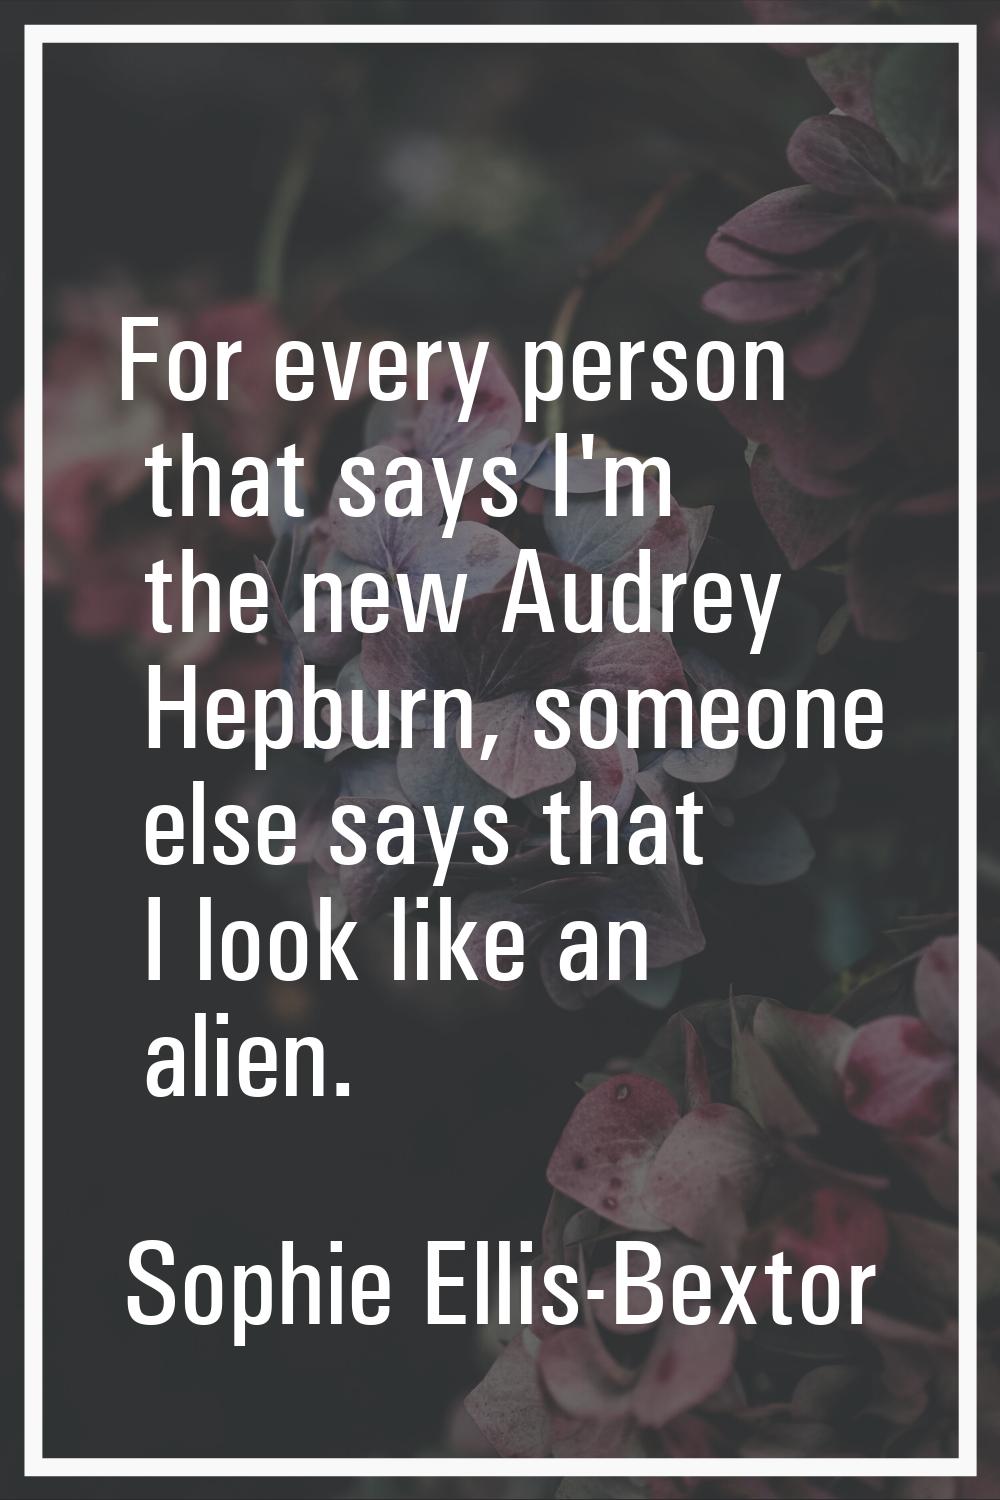 For every person that says I'm the new Audrey Hepburn, someone else says that I look like an alien.